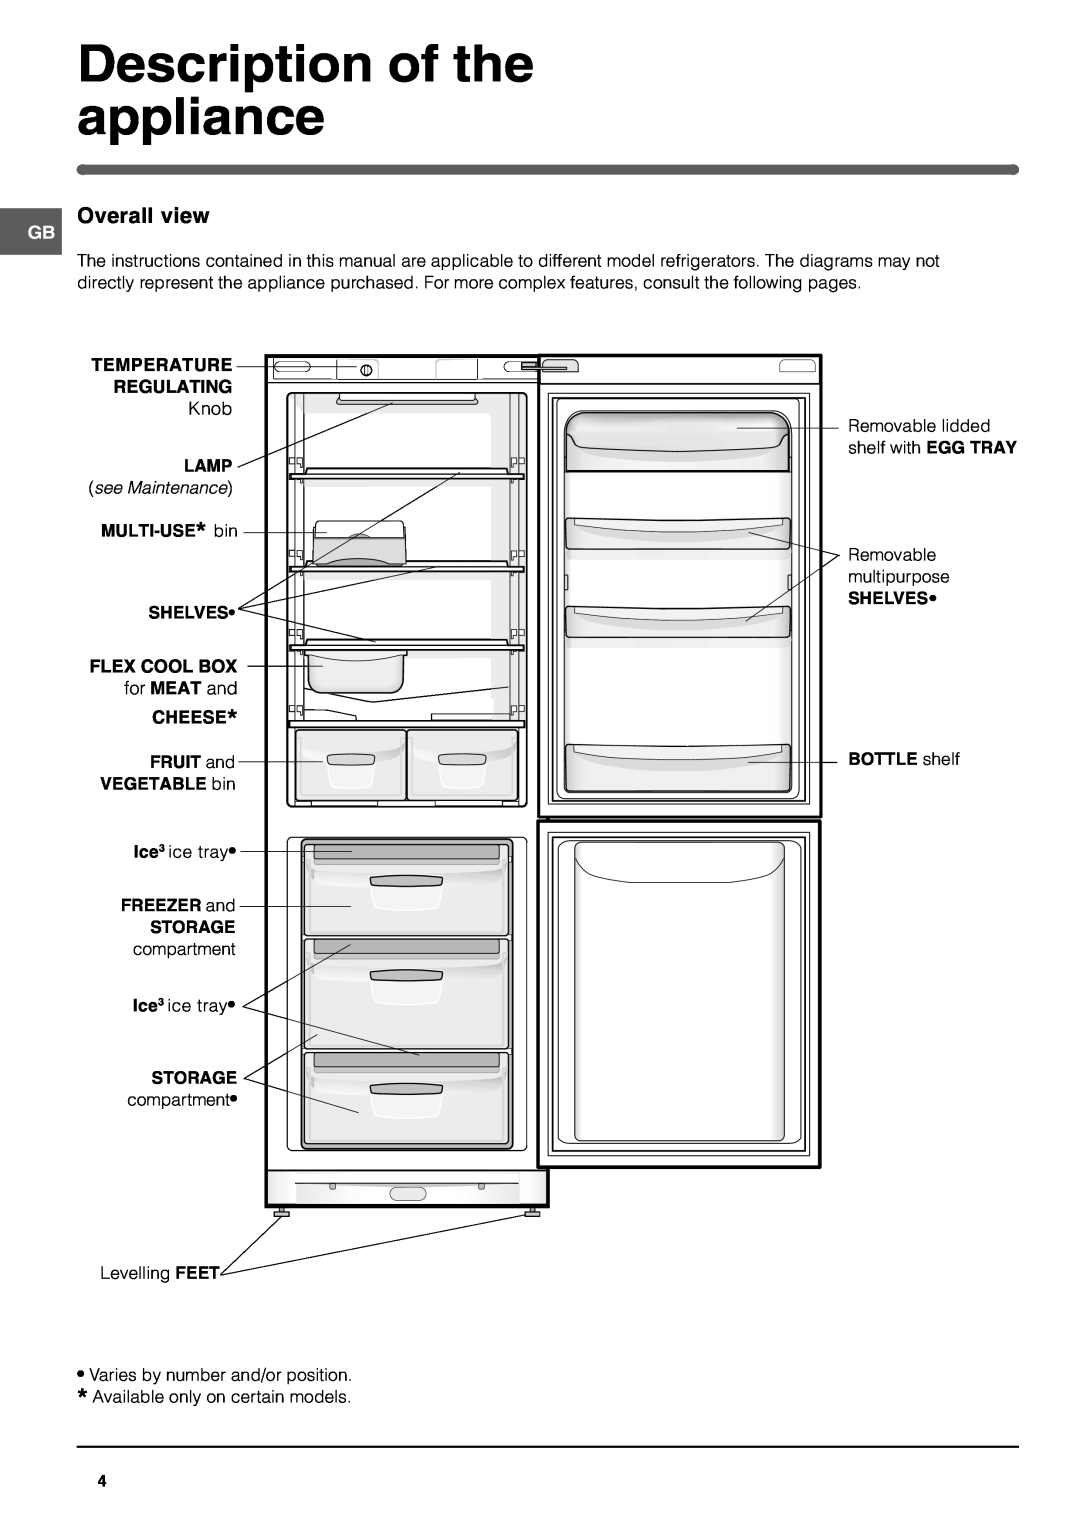 Indesit BAAN 134 Description of the appliance, Overall view, Temperature, Regulating, Lamp, MULTI-USE* bin, Flex Cool Box 